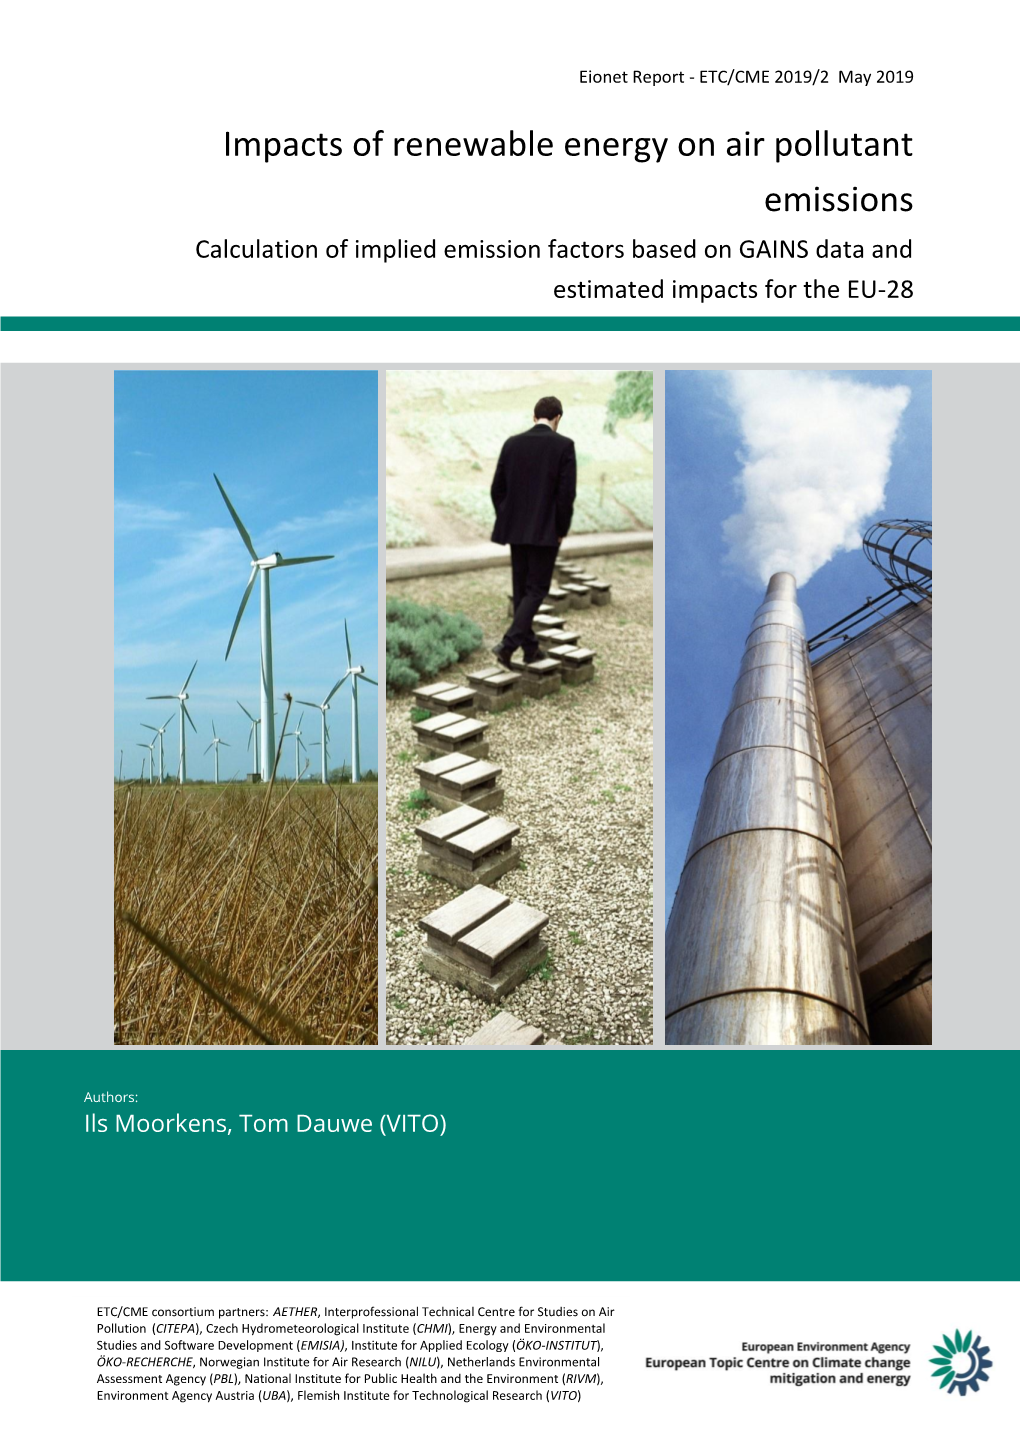 Impacts of Renewable Energy on Air Pollutant Emissions Calculation of Implied Emission Factors Based on GAINS Data and Estimated Impacts for the EU-28